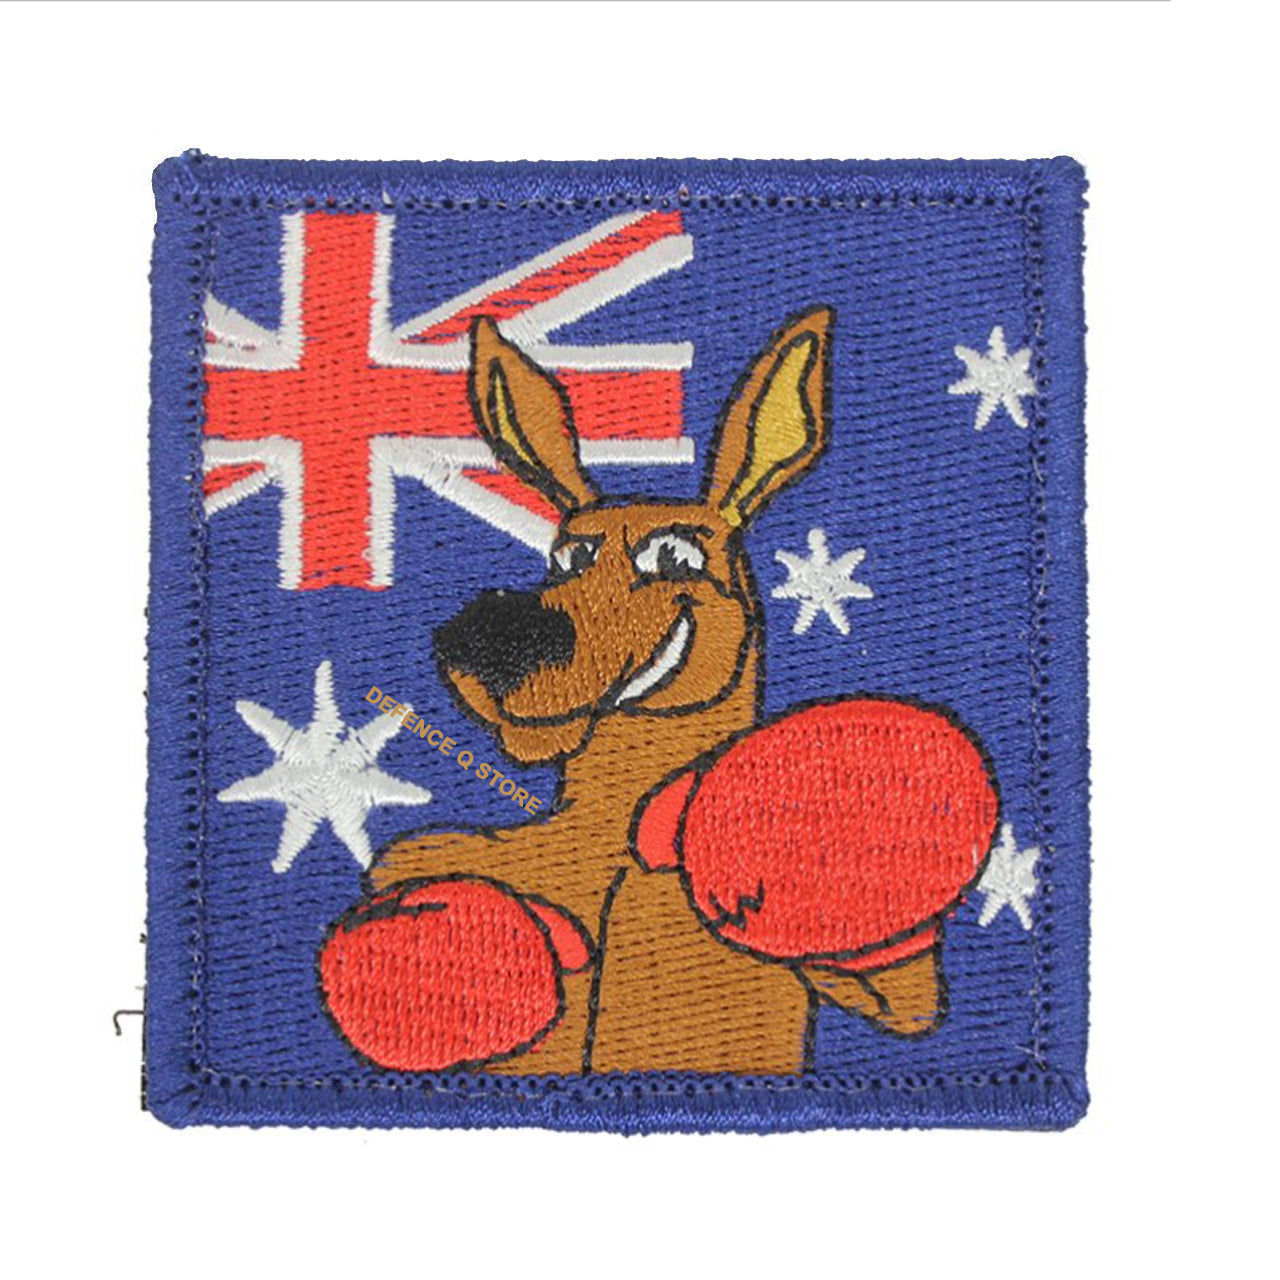 Experience the pride of Australia with our iconic Australian Flag and Boxing Kangaroo Embroidery Patch, featuring a sturdy Velcro backing for easy application. Measuring at a compact 6x6cm, this patch is the perfect addition to your collection or to show your love for Australia on any surface. www.defenceqstore.com.au